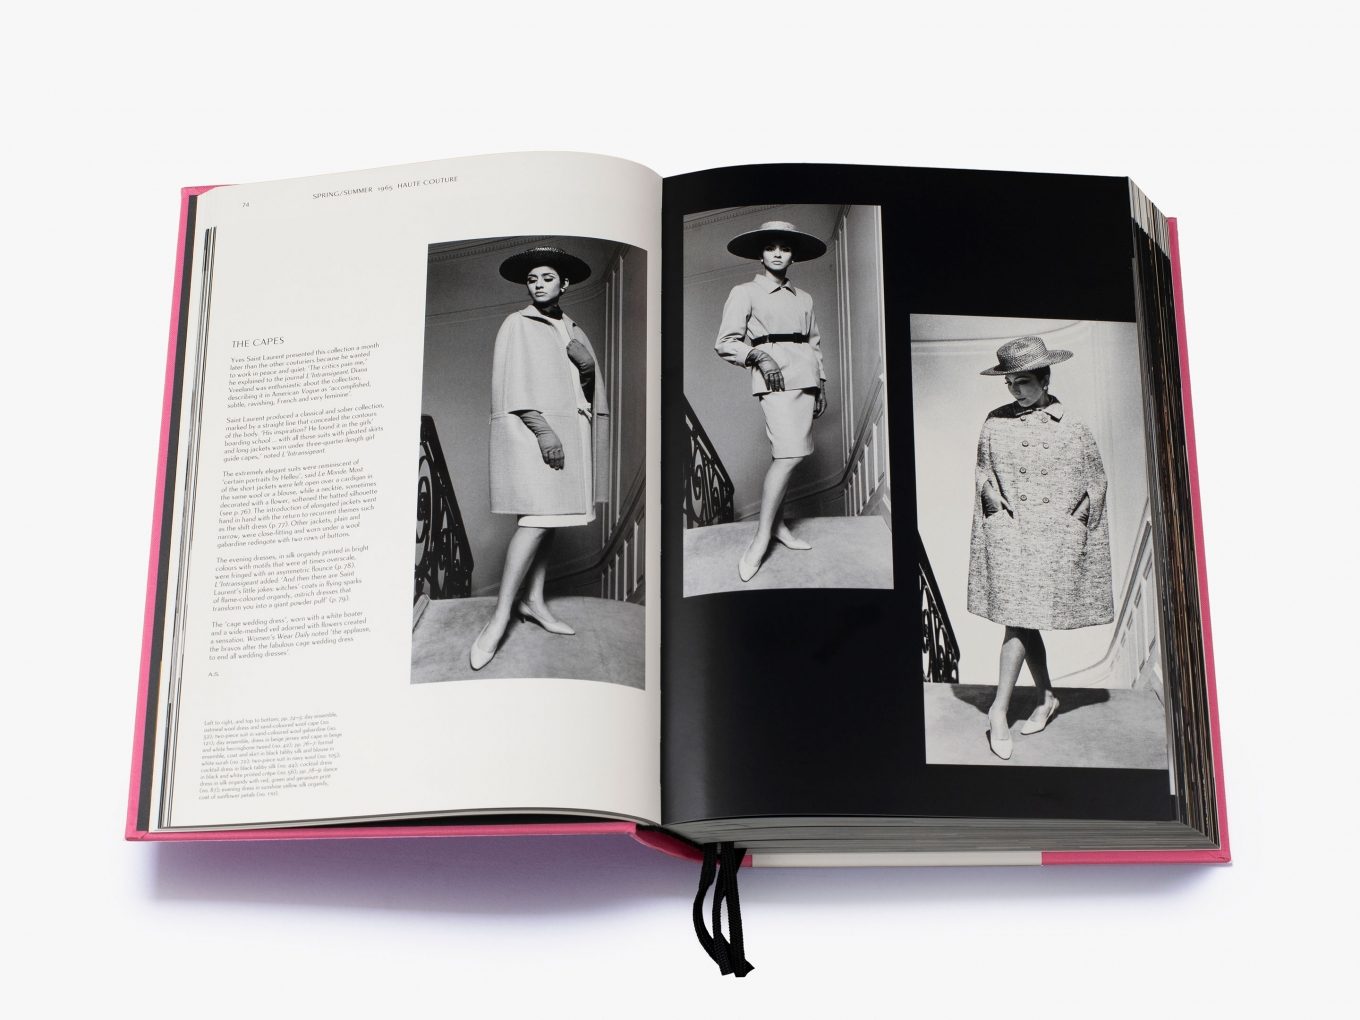 Catwalk Yves Saint Laurent by Thames and Hudson – Paloma + Co